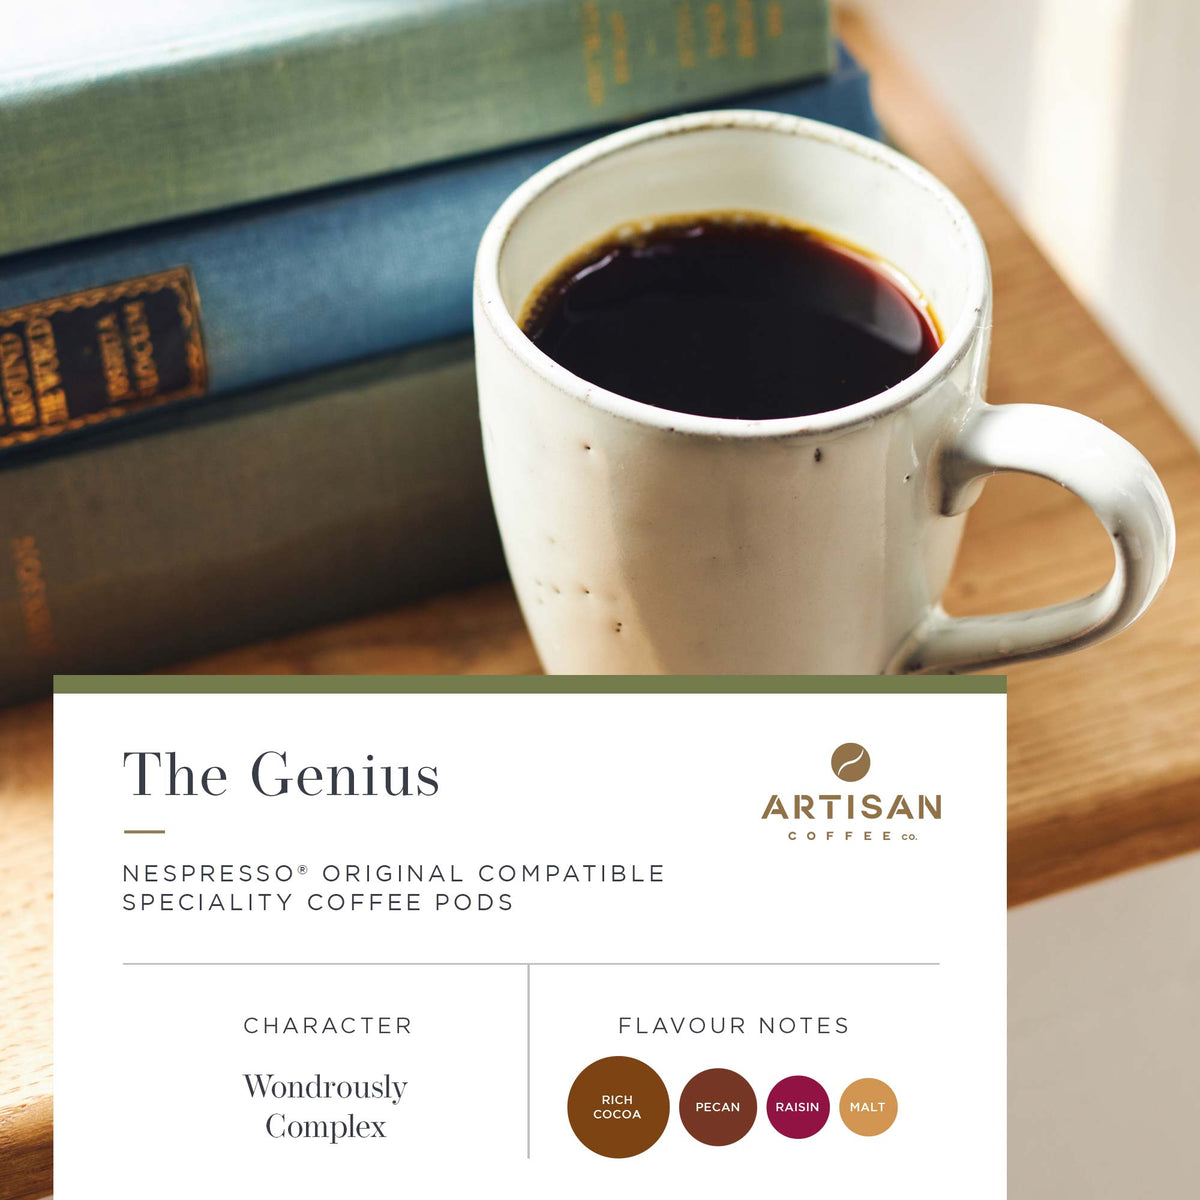 Artisan Coffee Co The Genius Pods Infographic Flavour Notes